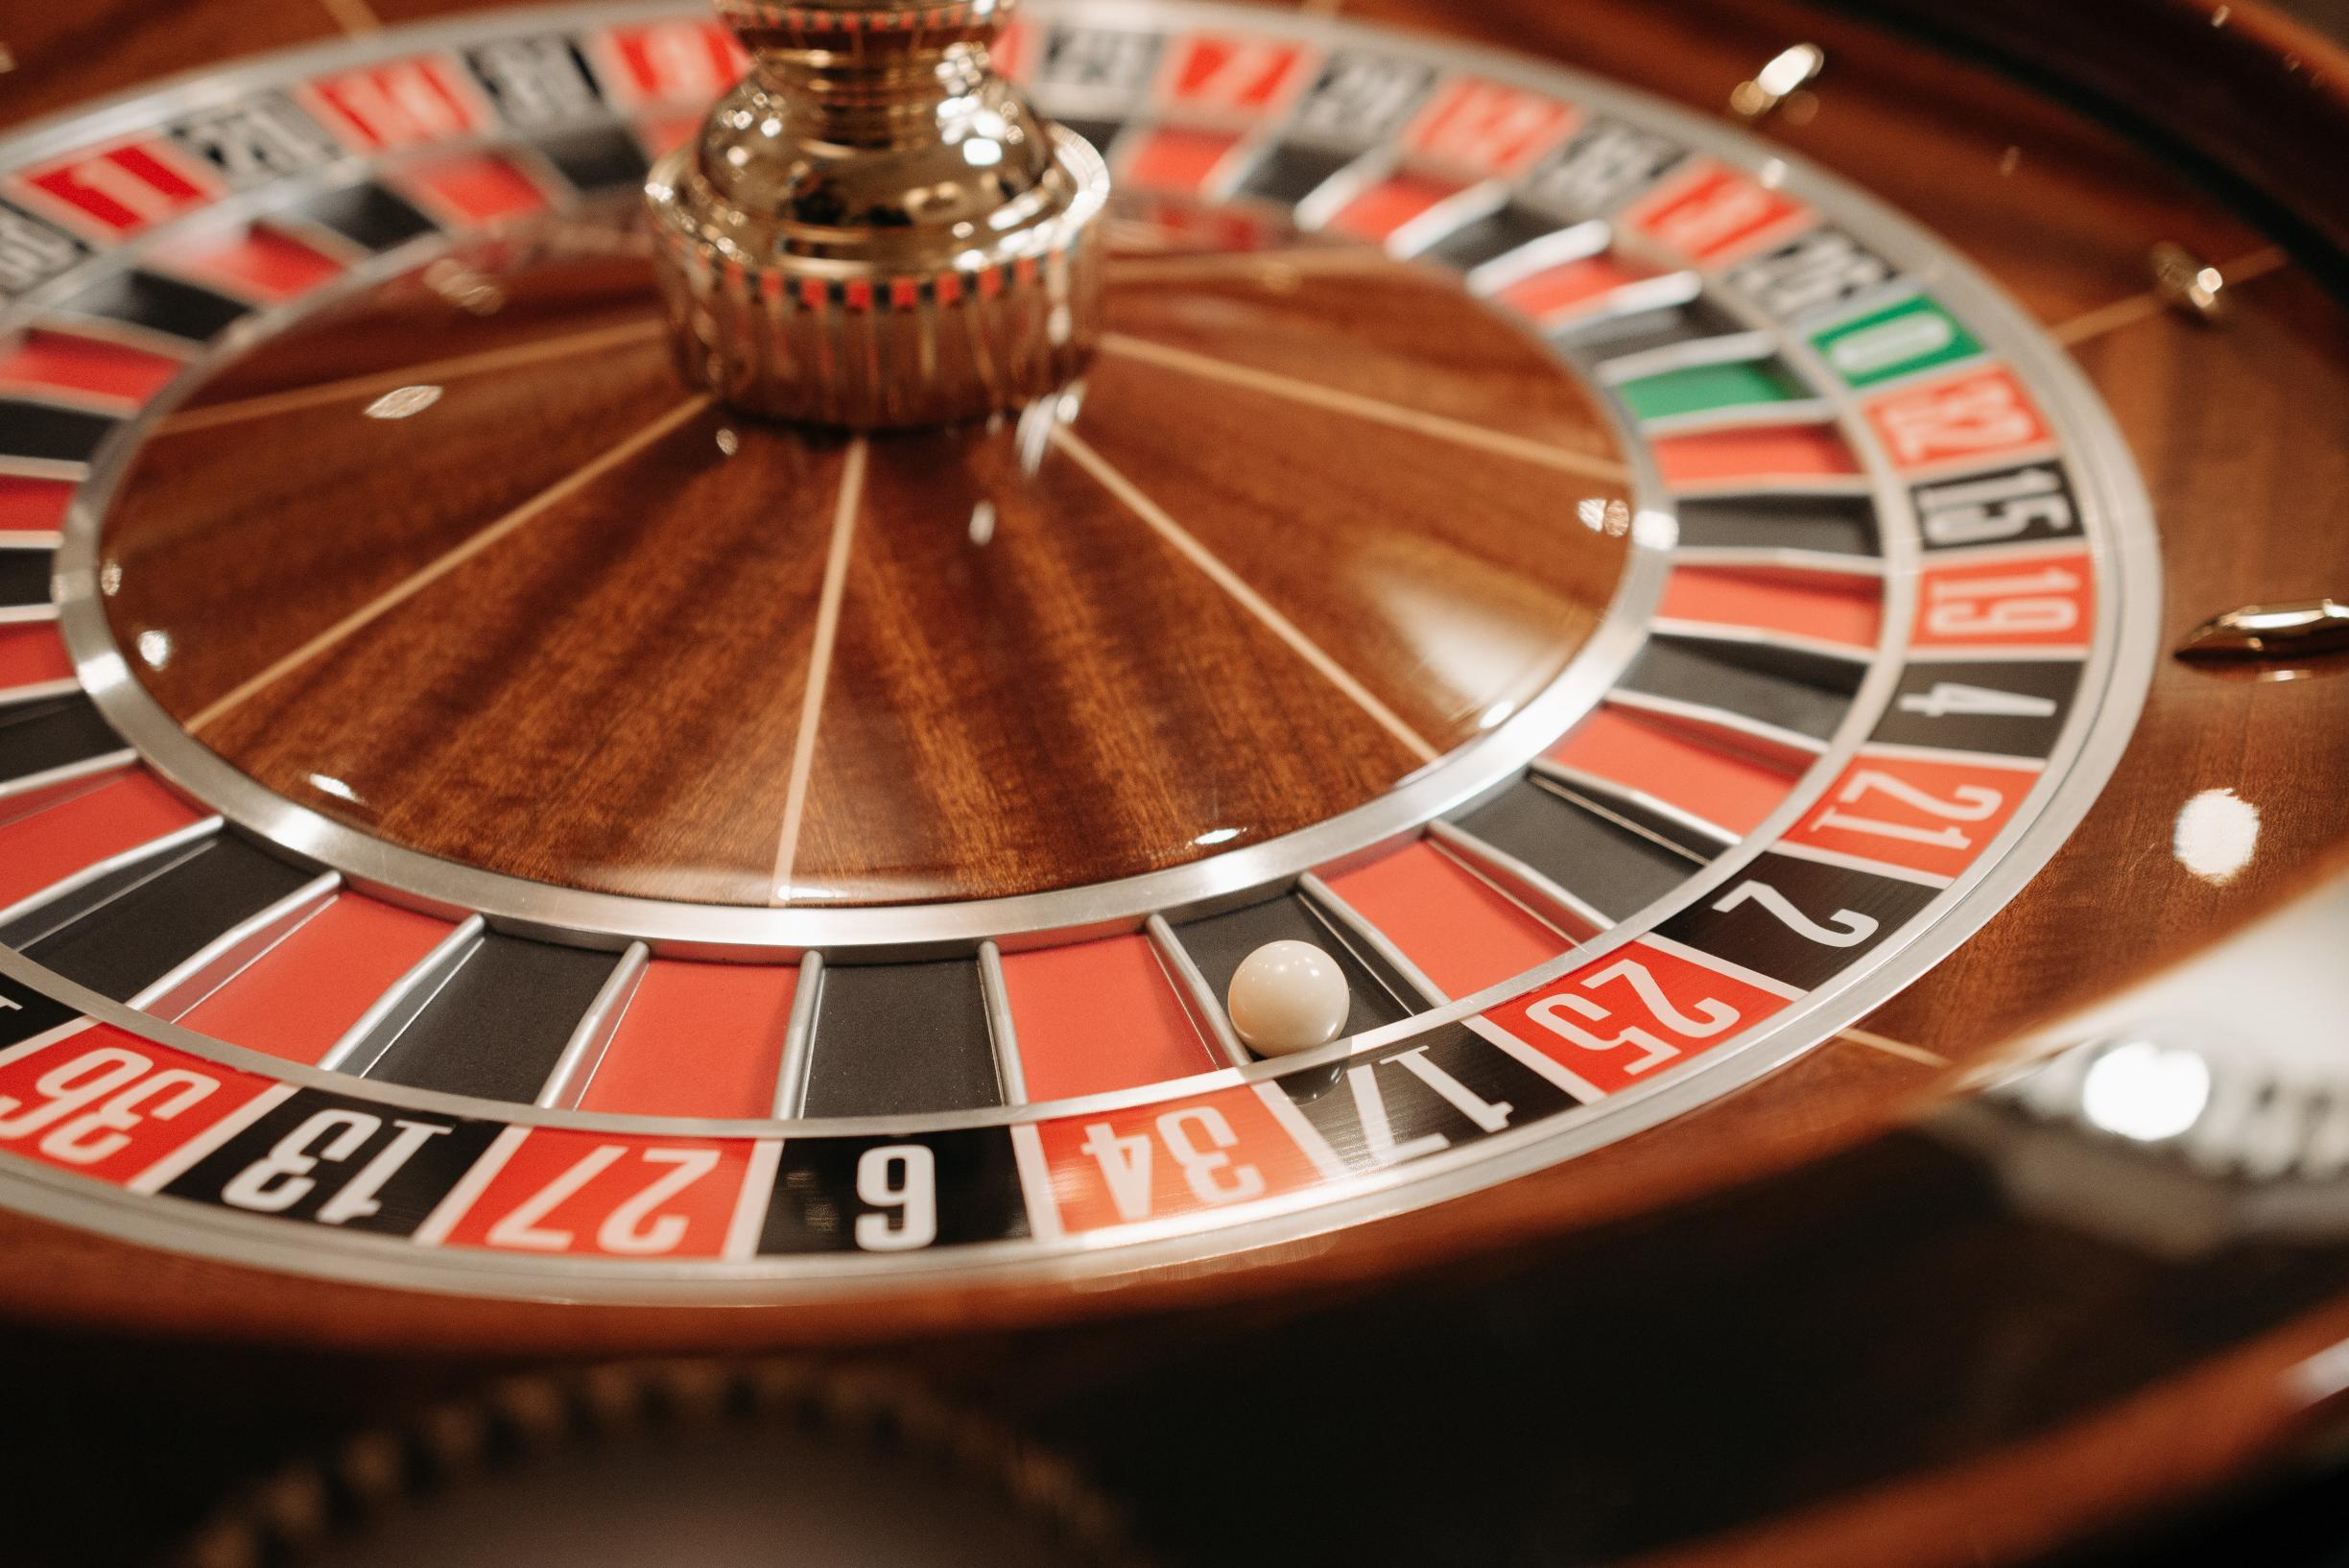 Which are the top 10 gambling software providers dominating the market this year?